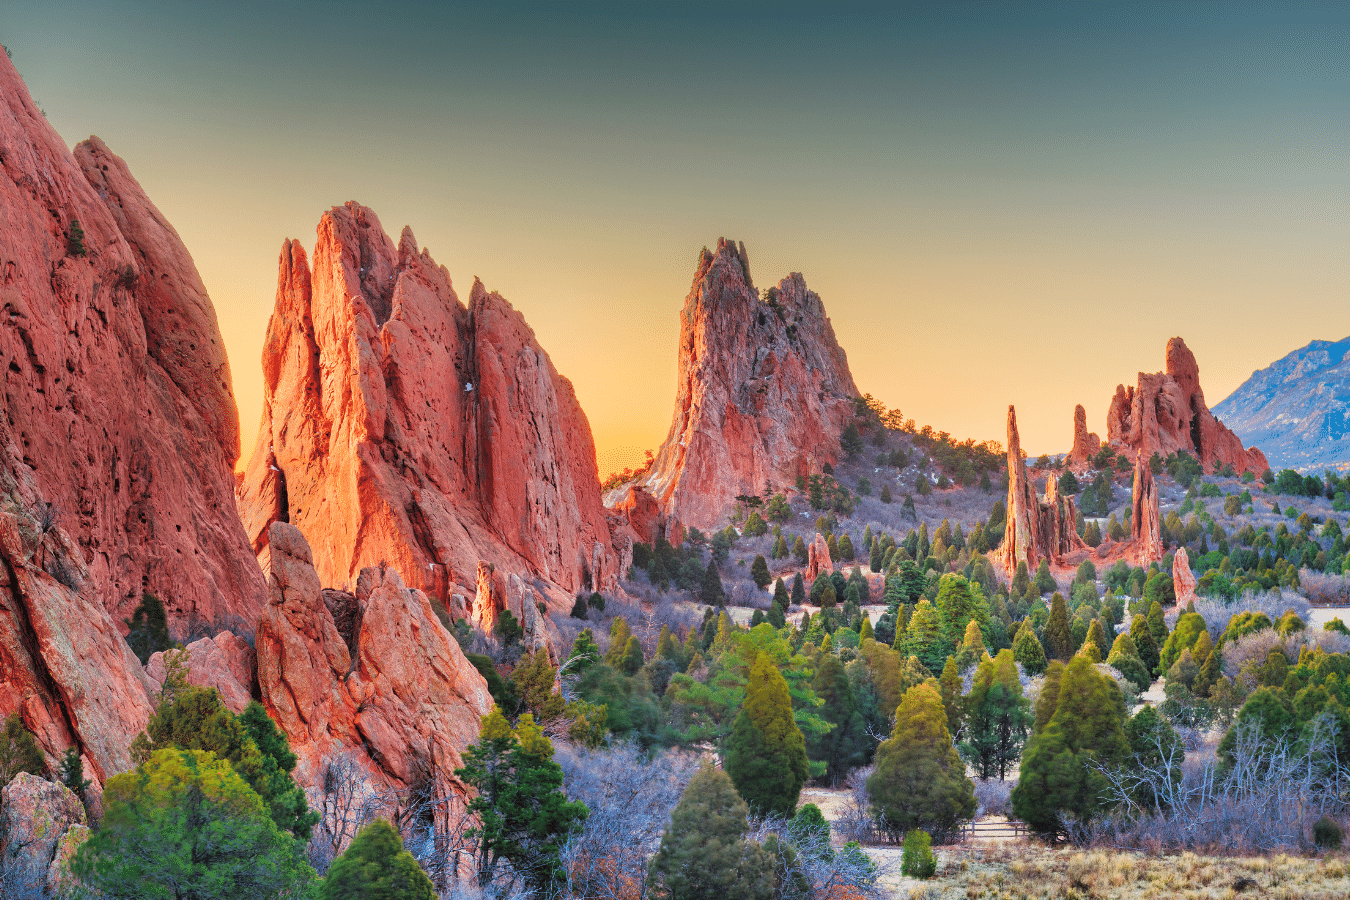 Colorado Springs Outdoor activities and nature hikes with large rocks in the mountains